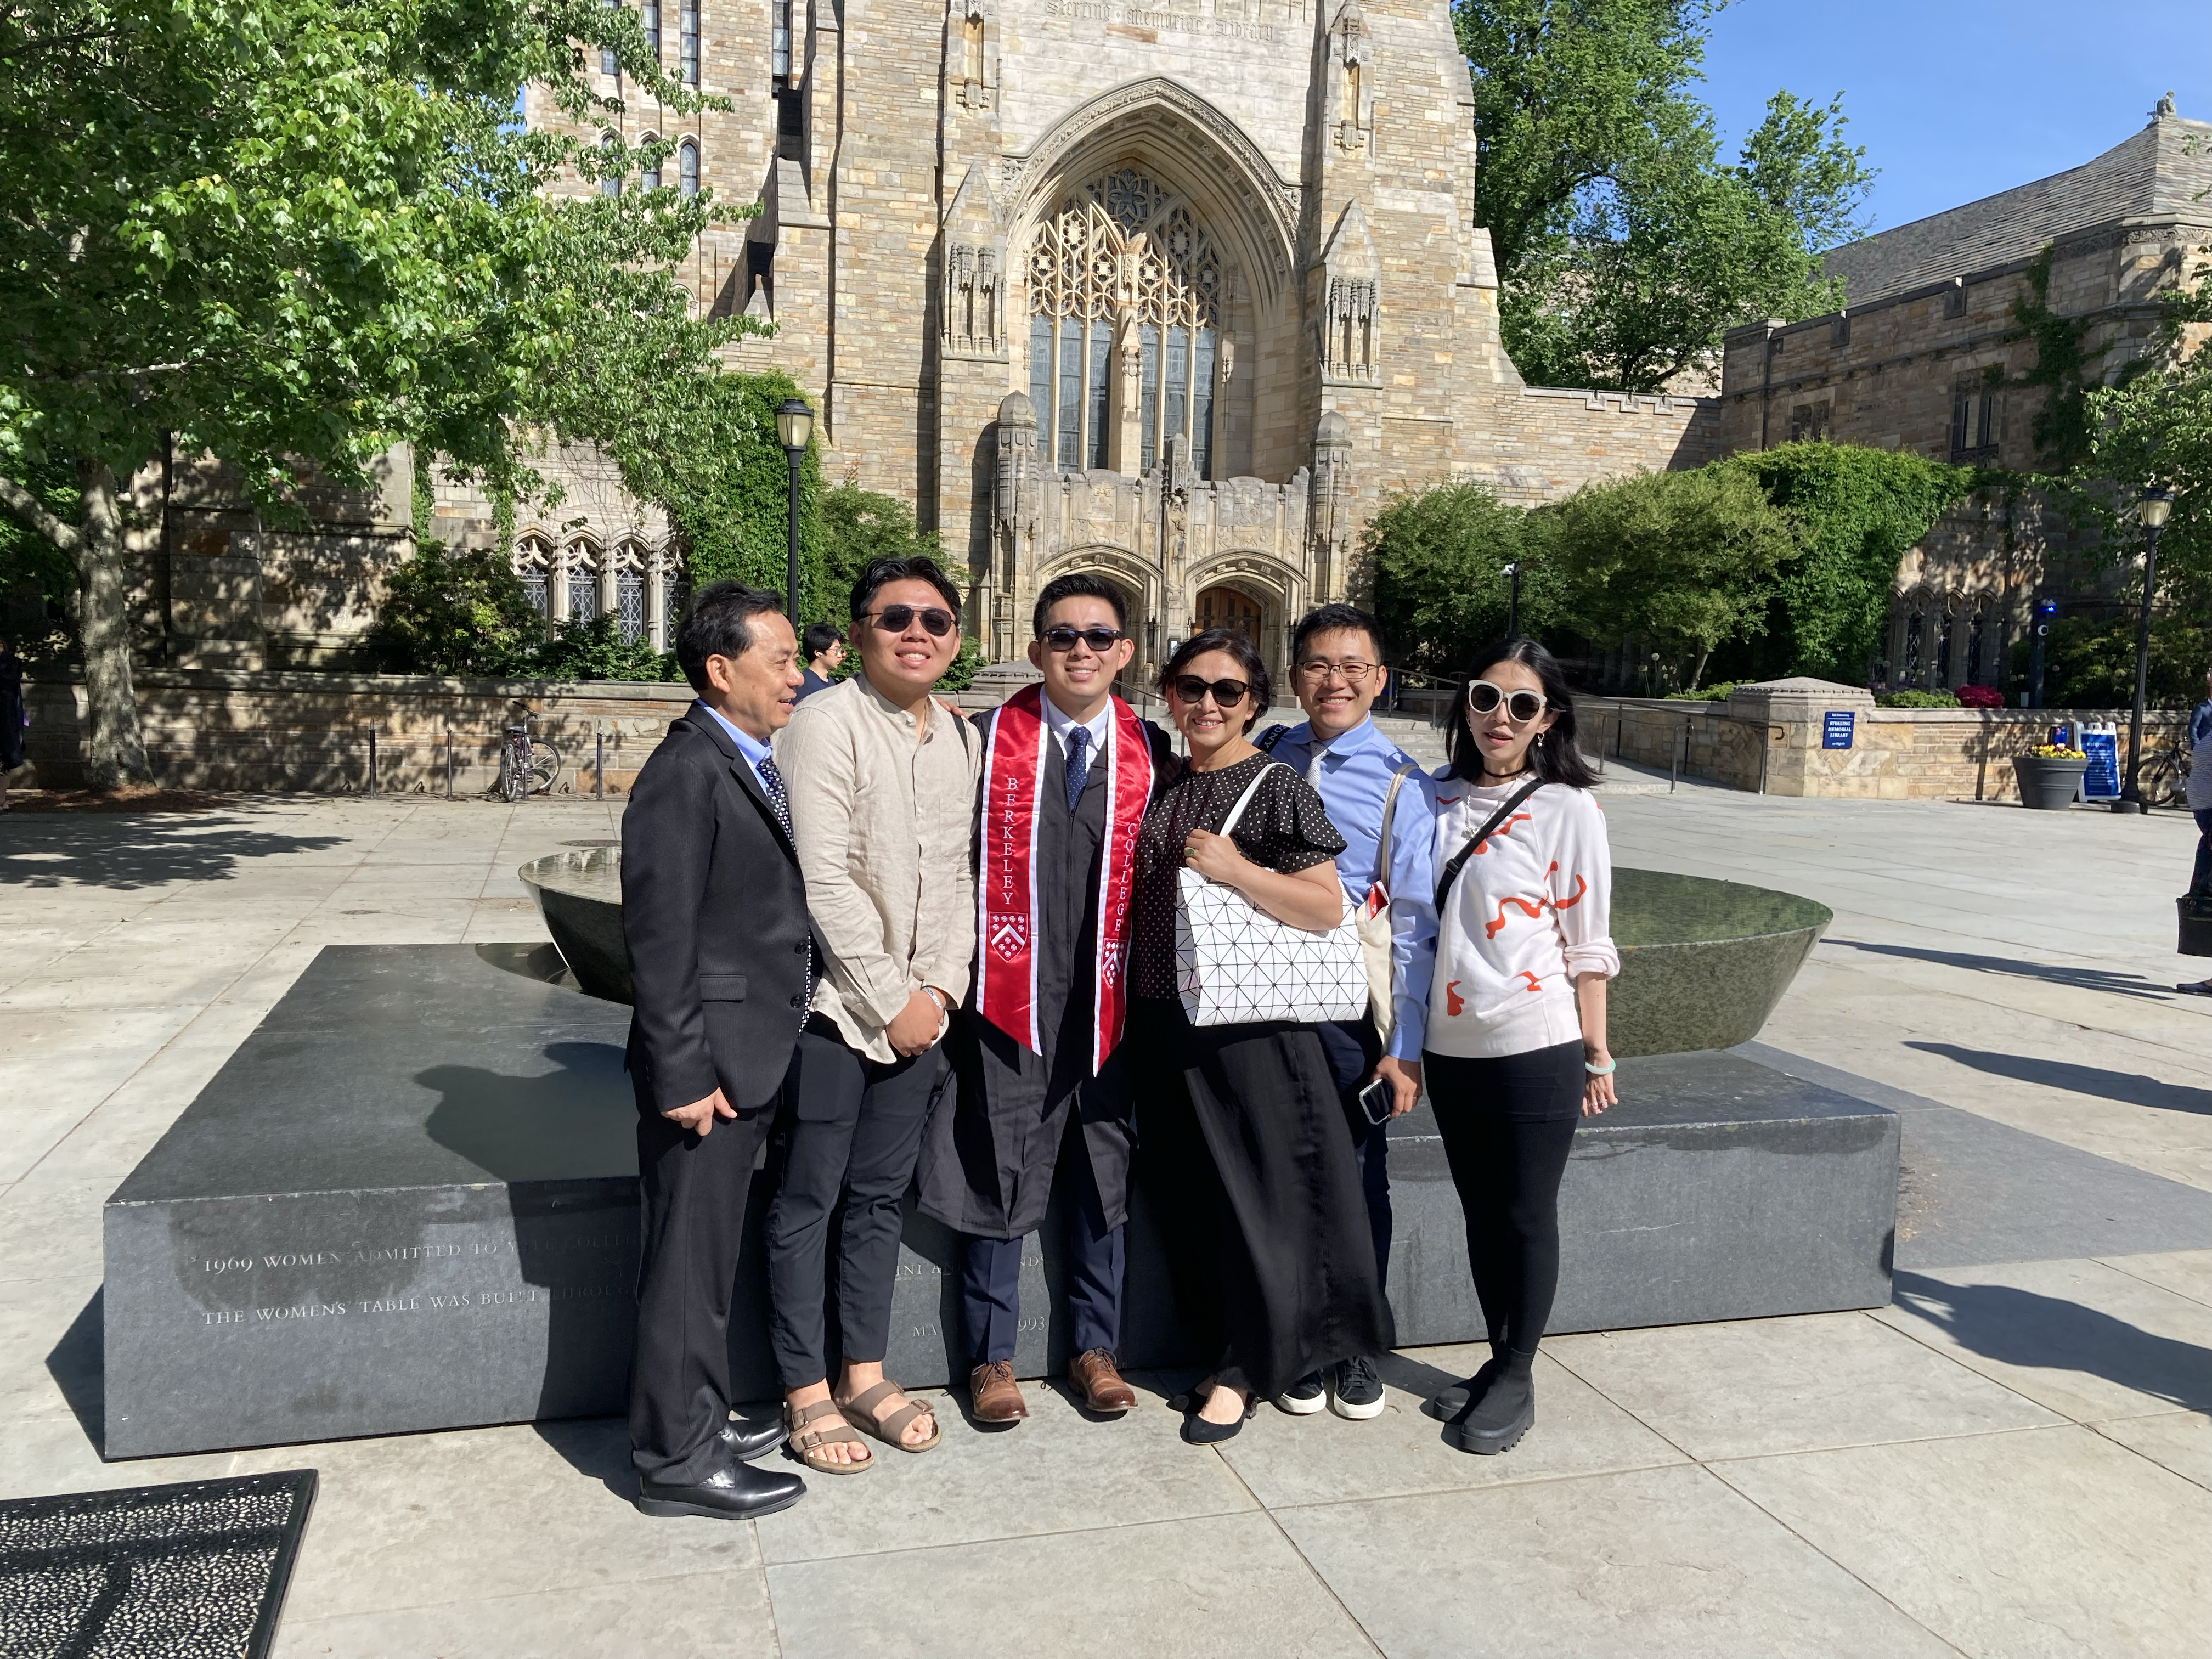 Asian American family of six: The graduate stands at center wearing his gown and the red stole of Berkeley College. To his right are two men, the older one in a dark suit and dress shoes, laughing. The younger one with sandals and a lightweight shirt. The mother wears a black outfit and holds a black and white handbag. Another young man wears a blue shirt. A young girl wears a white sweatshirt with orange design.